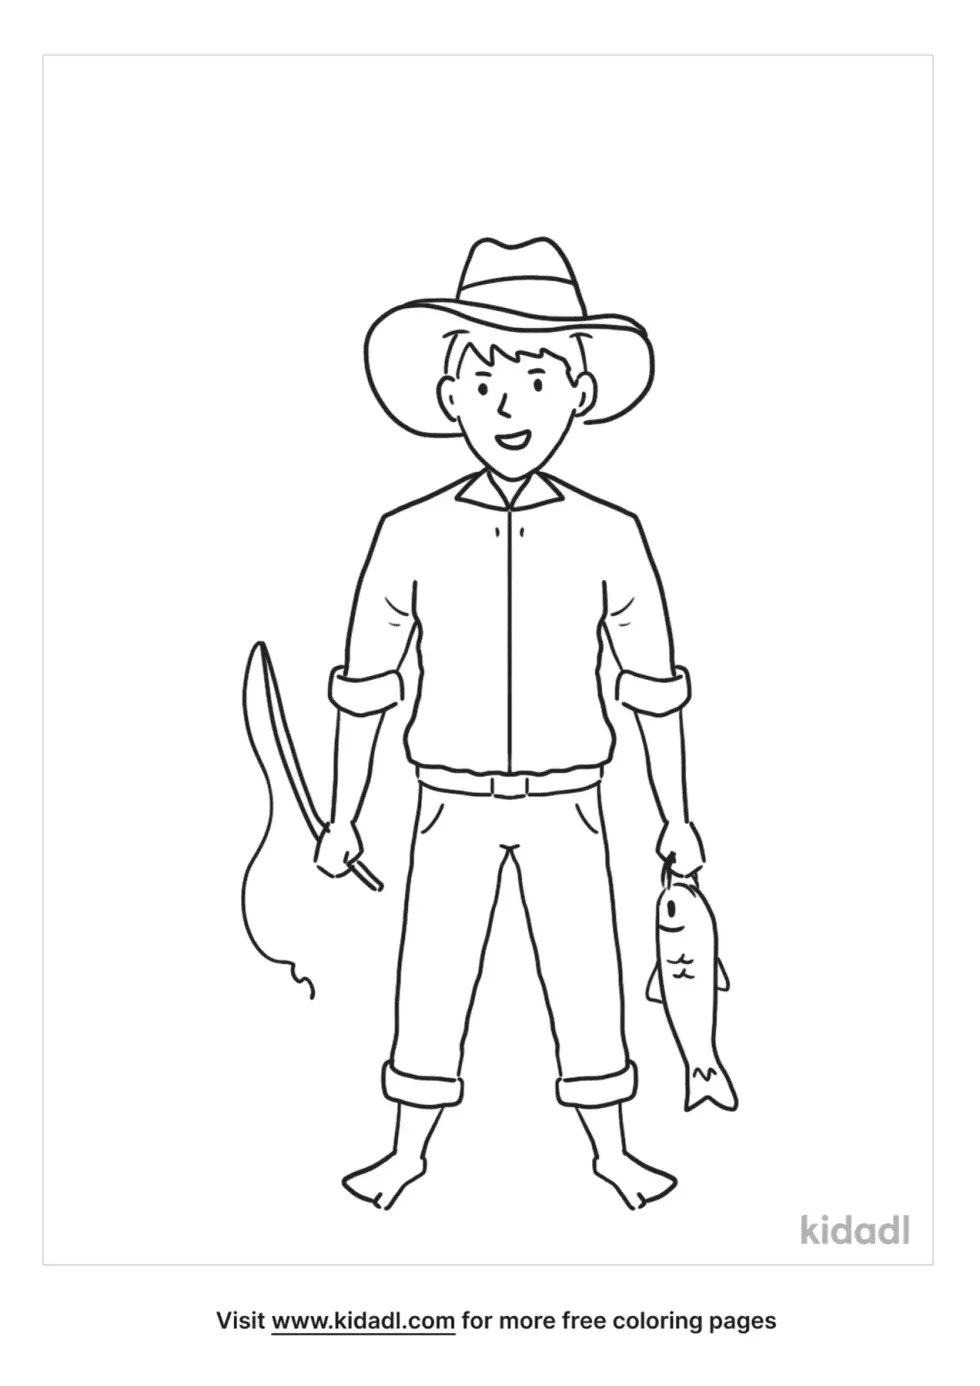 Huckleberry Finn Coloring Page